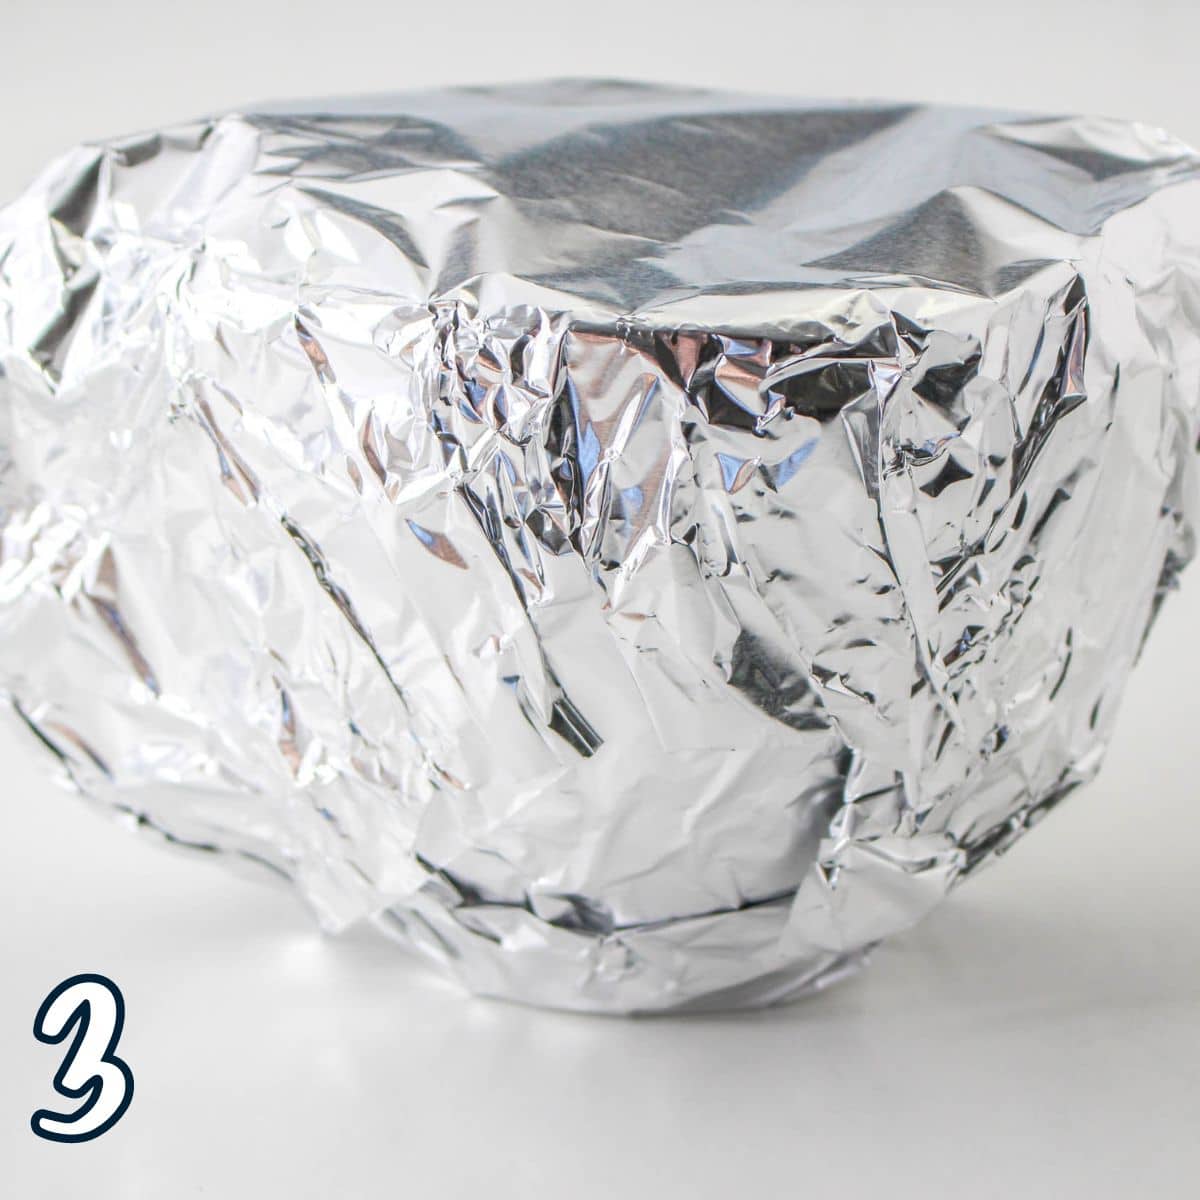 Foil completely covering a bowl filled with sweetened condensed milk. 